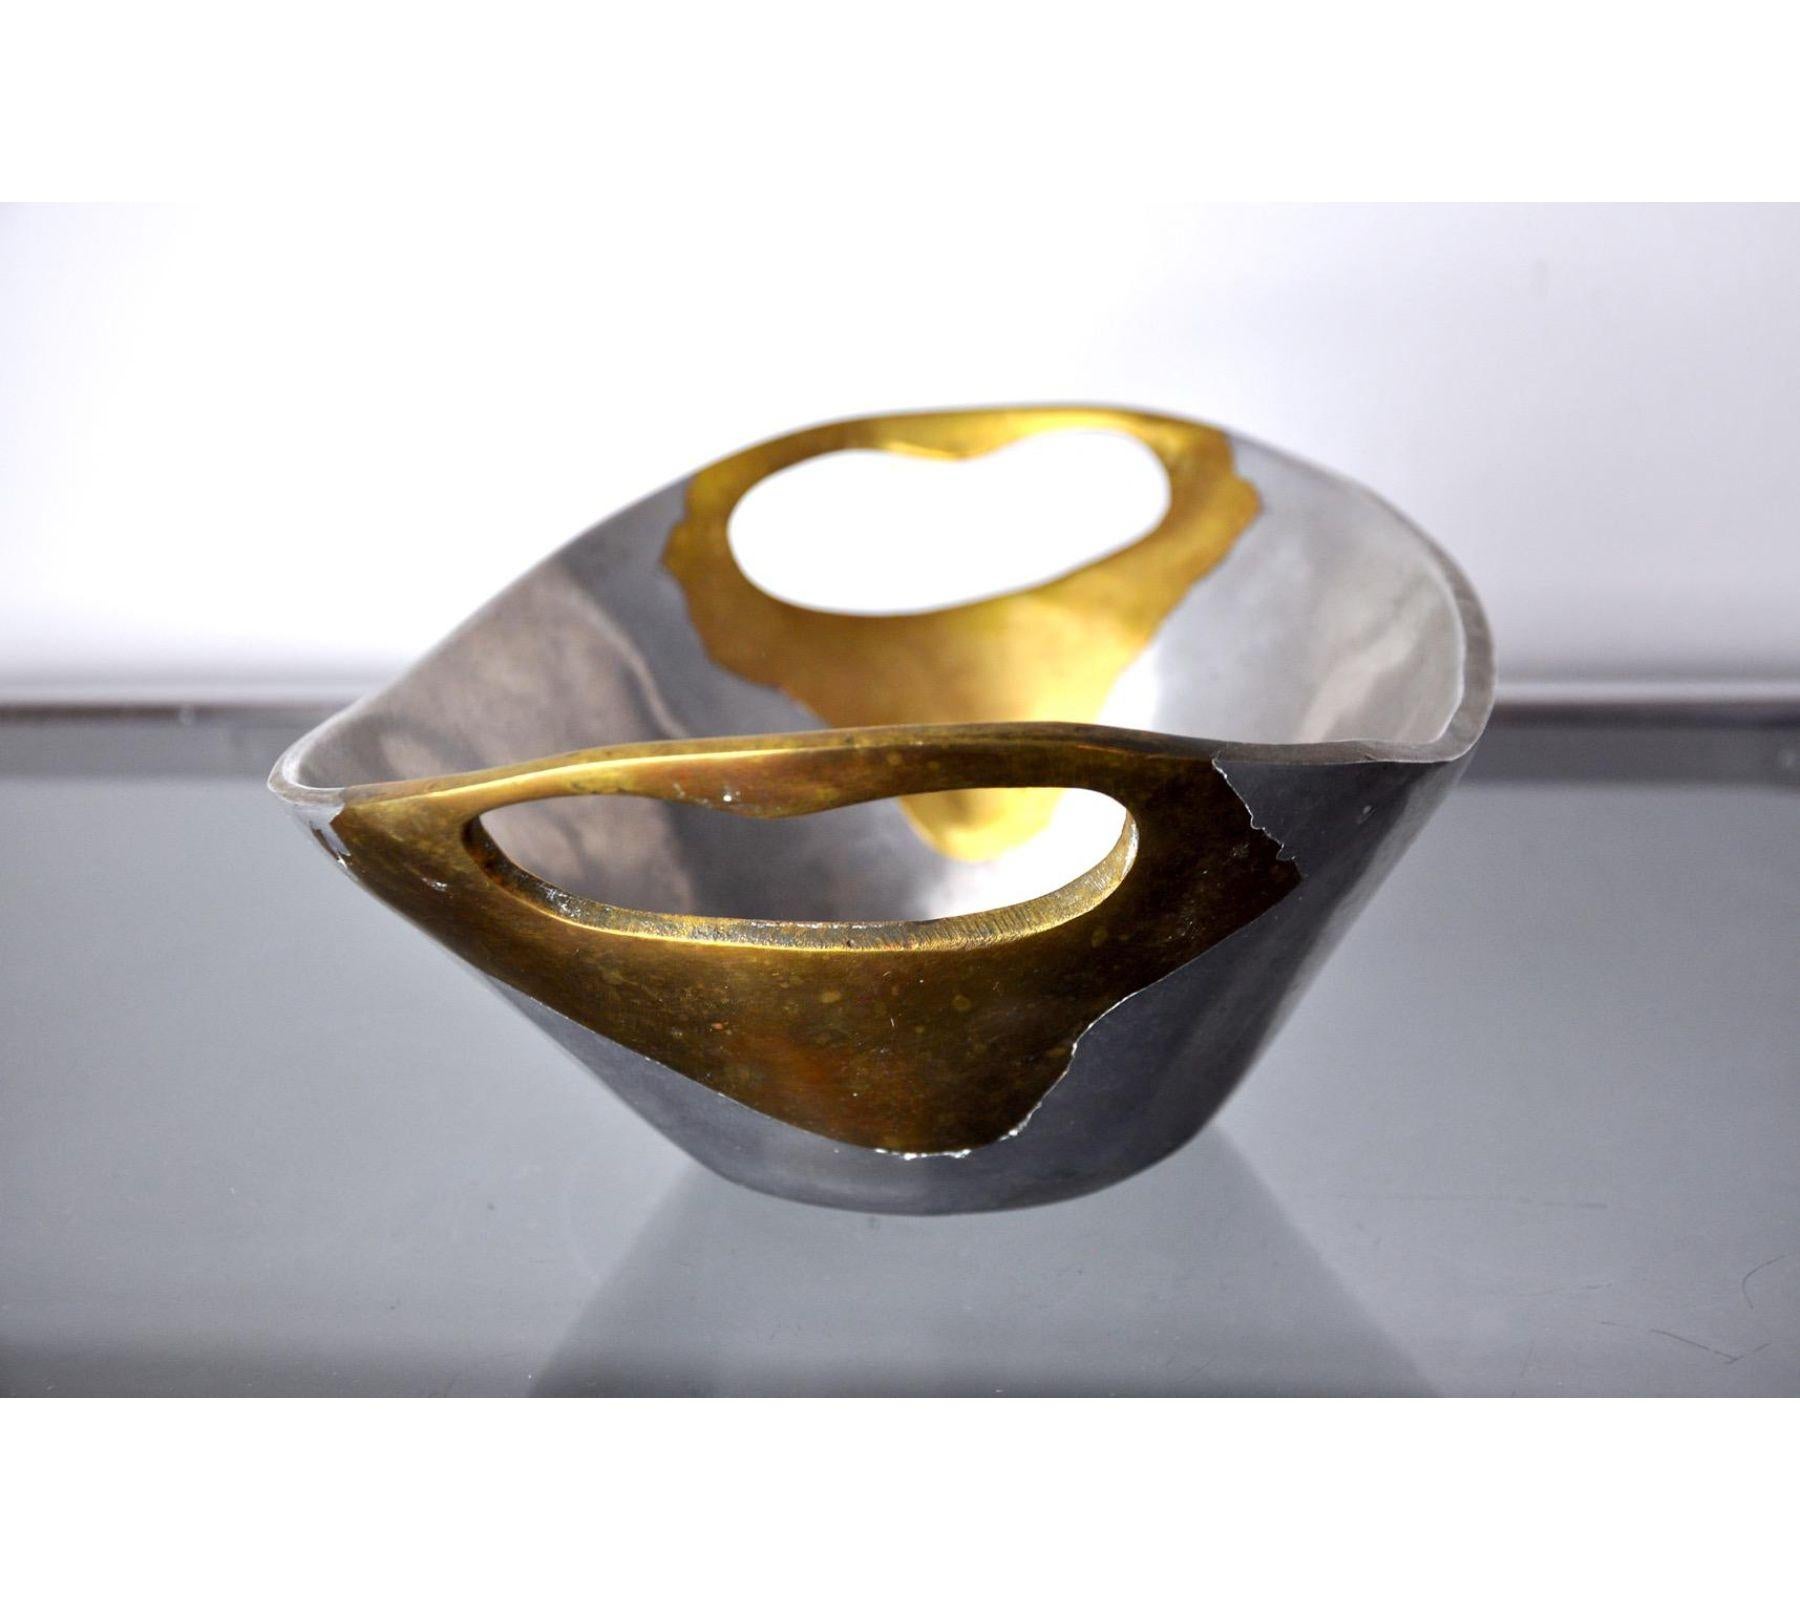 Superb empty Brutalist pocket designated and made by the artist David Marshall around the 80s, spain. Structure in brass and aluminum. Beautiful design object that will decorate your interior wonderfully. Time marks relating to the age of the object.